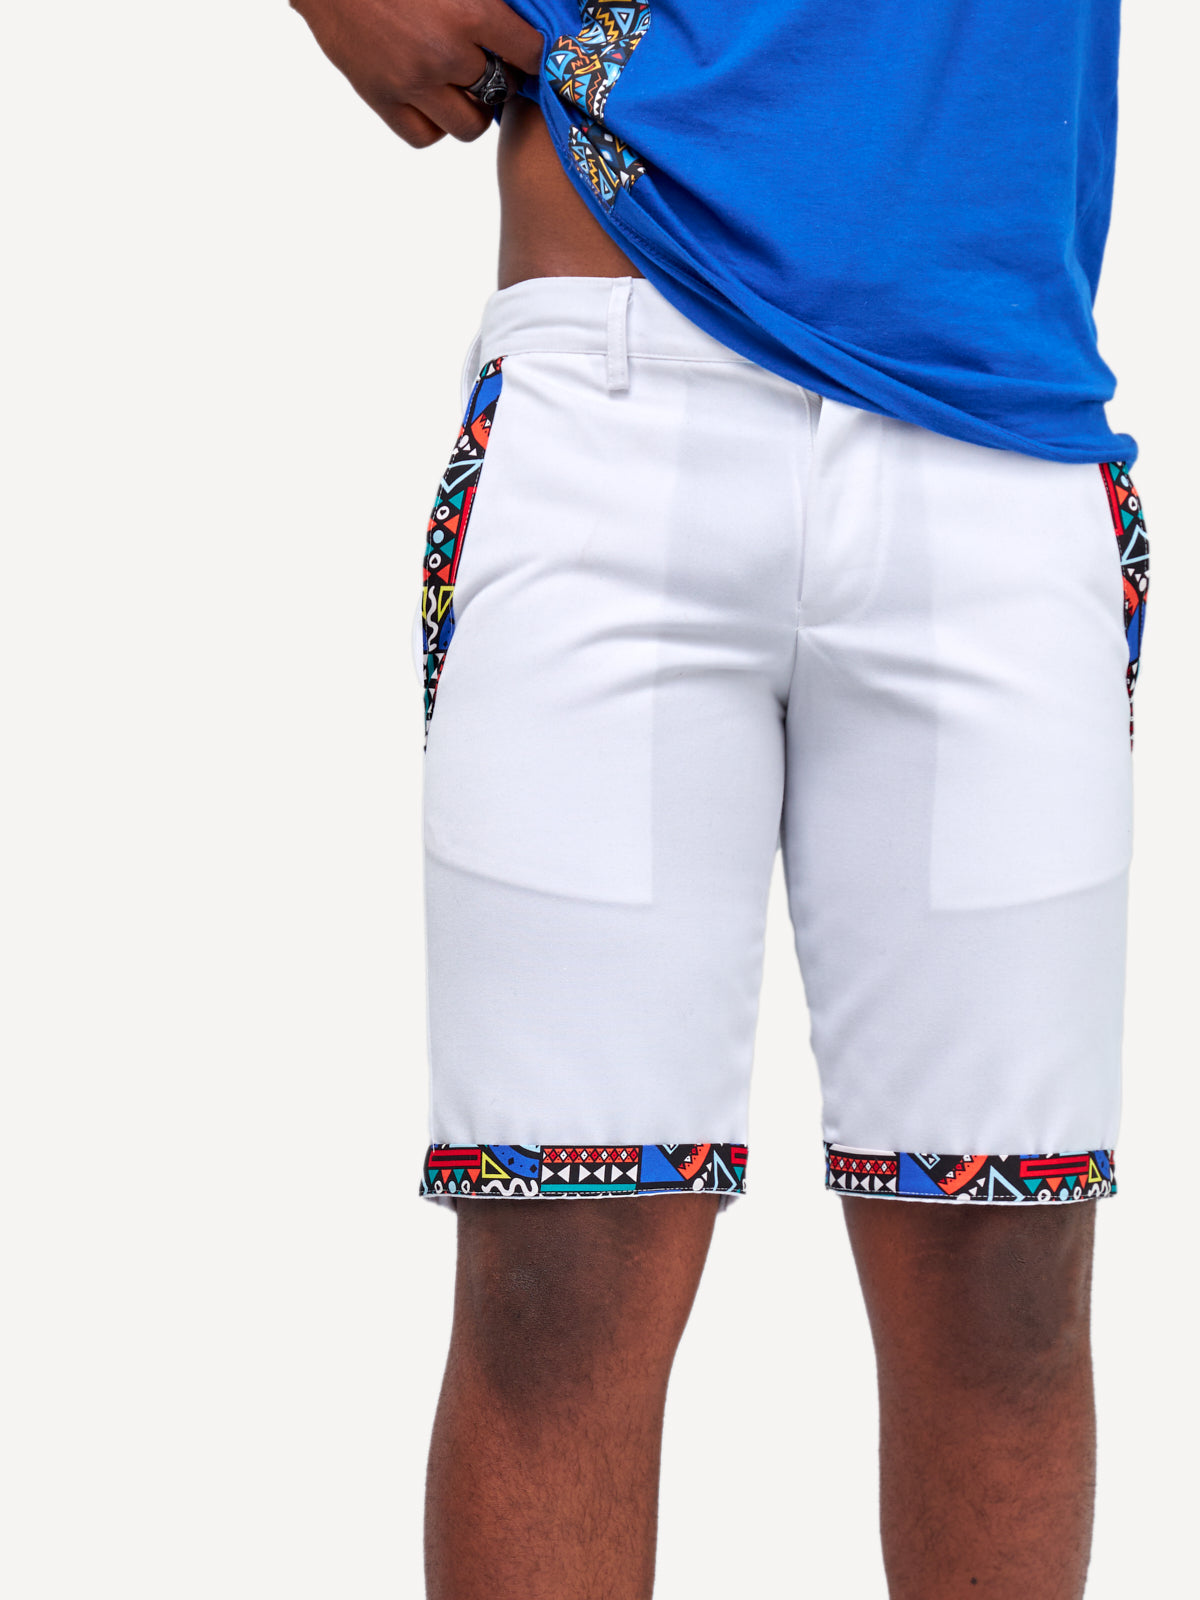 Kali Shorts: White with Blue Tribal